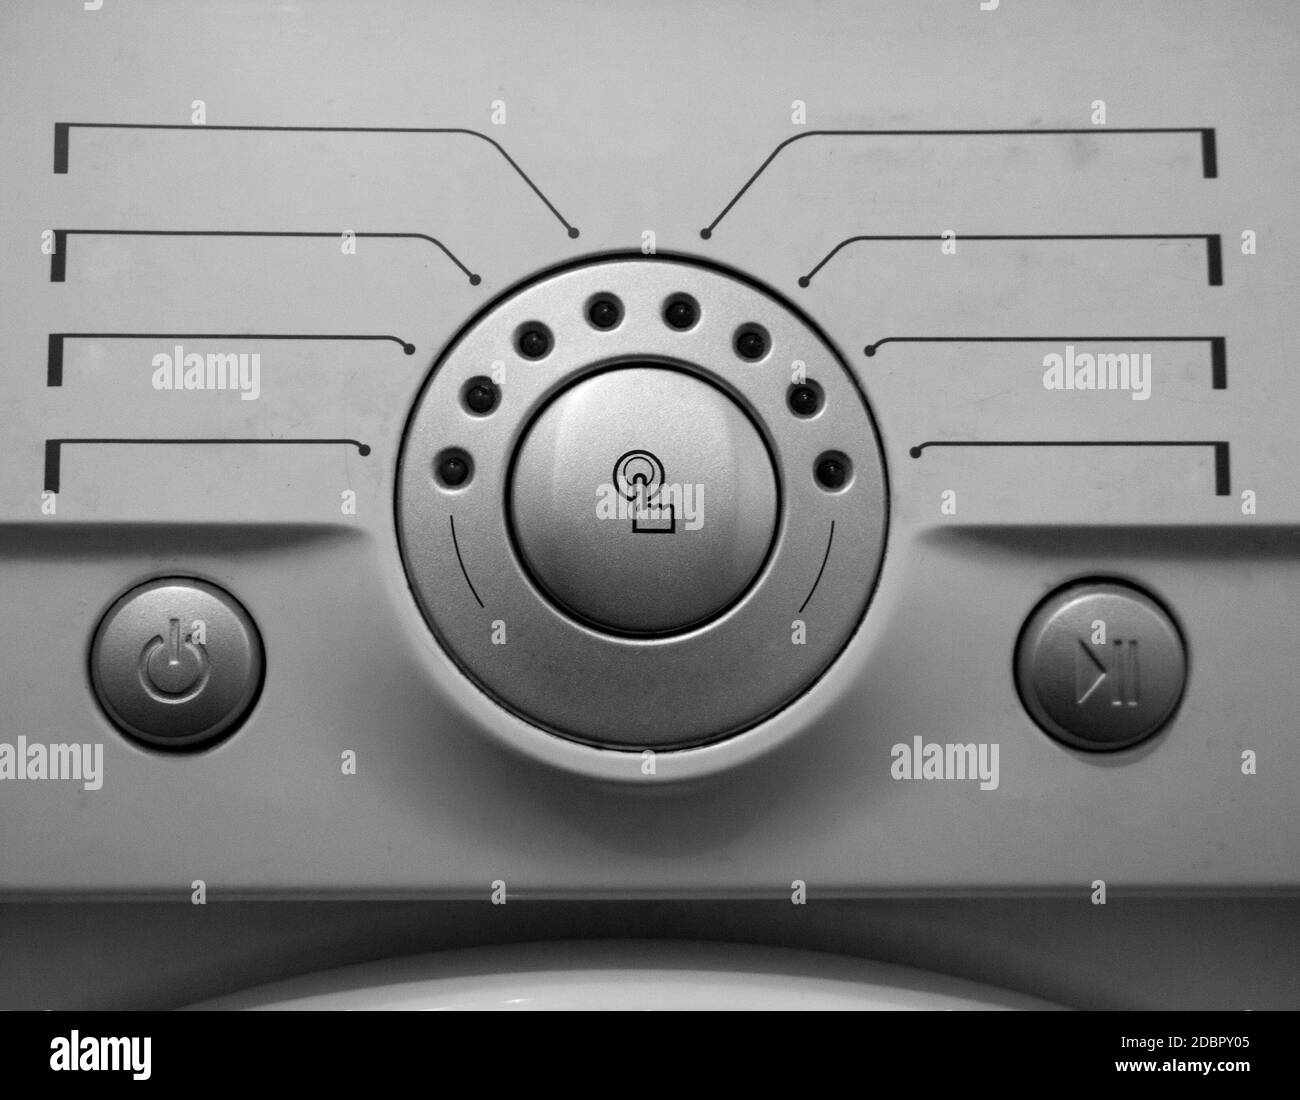 Details of the home washing machine control Stock Photo